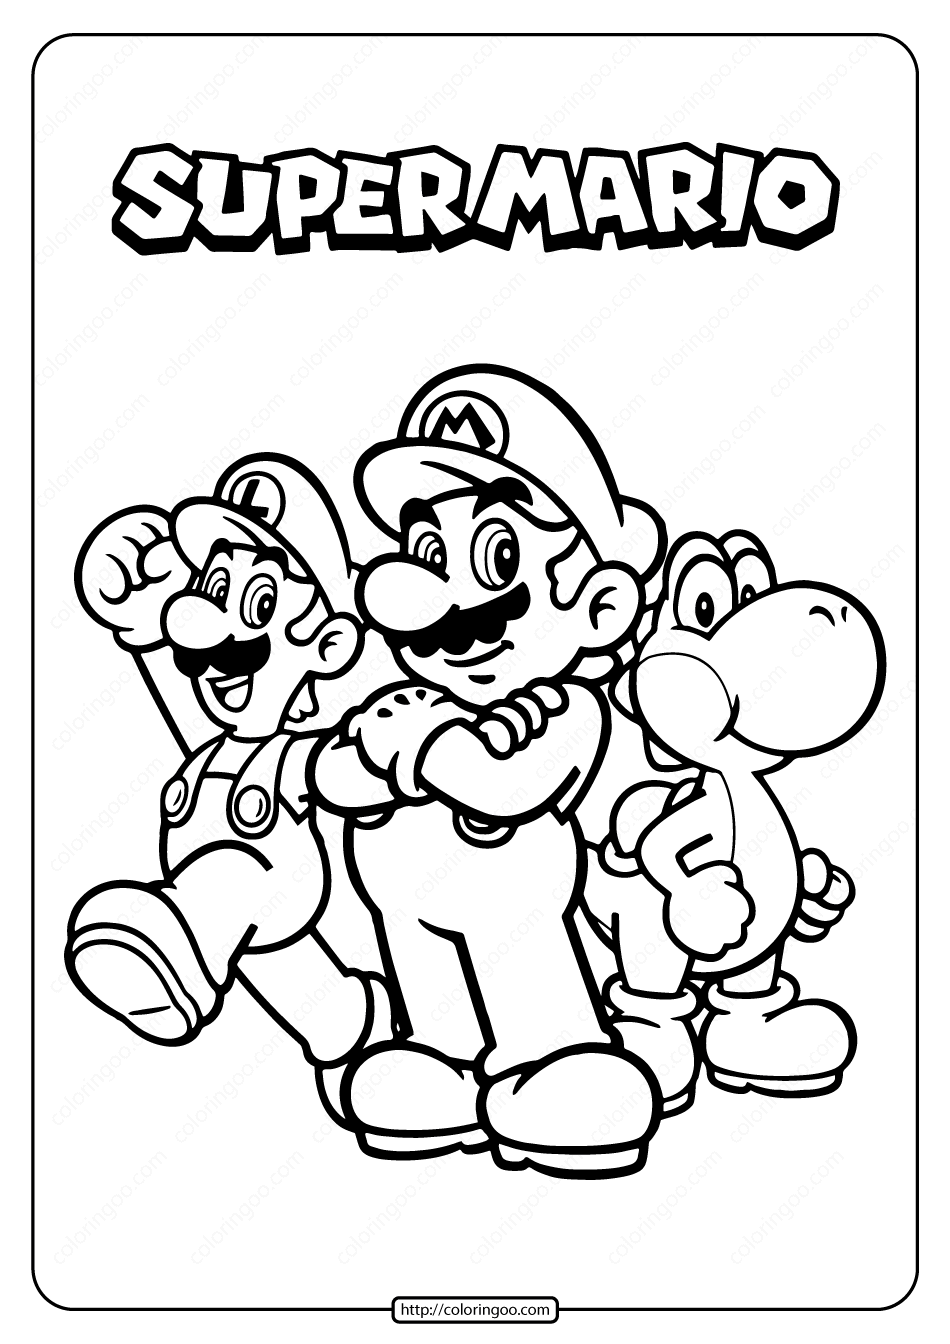 Free printable super mario pdf coloring page super mario coloring pages mario coloring pages coloring pages